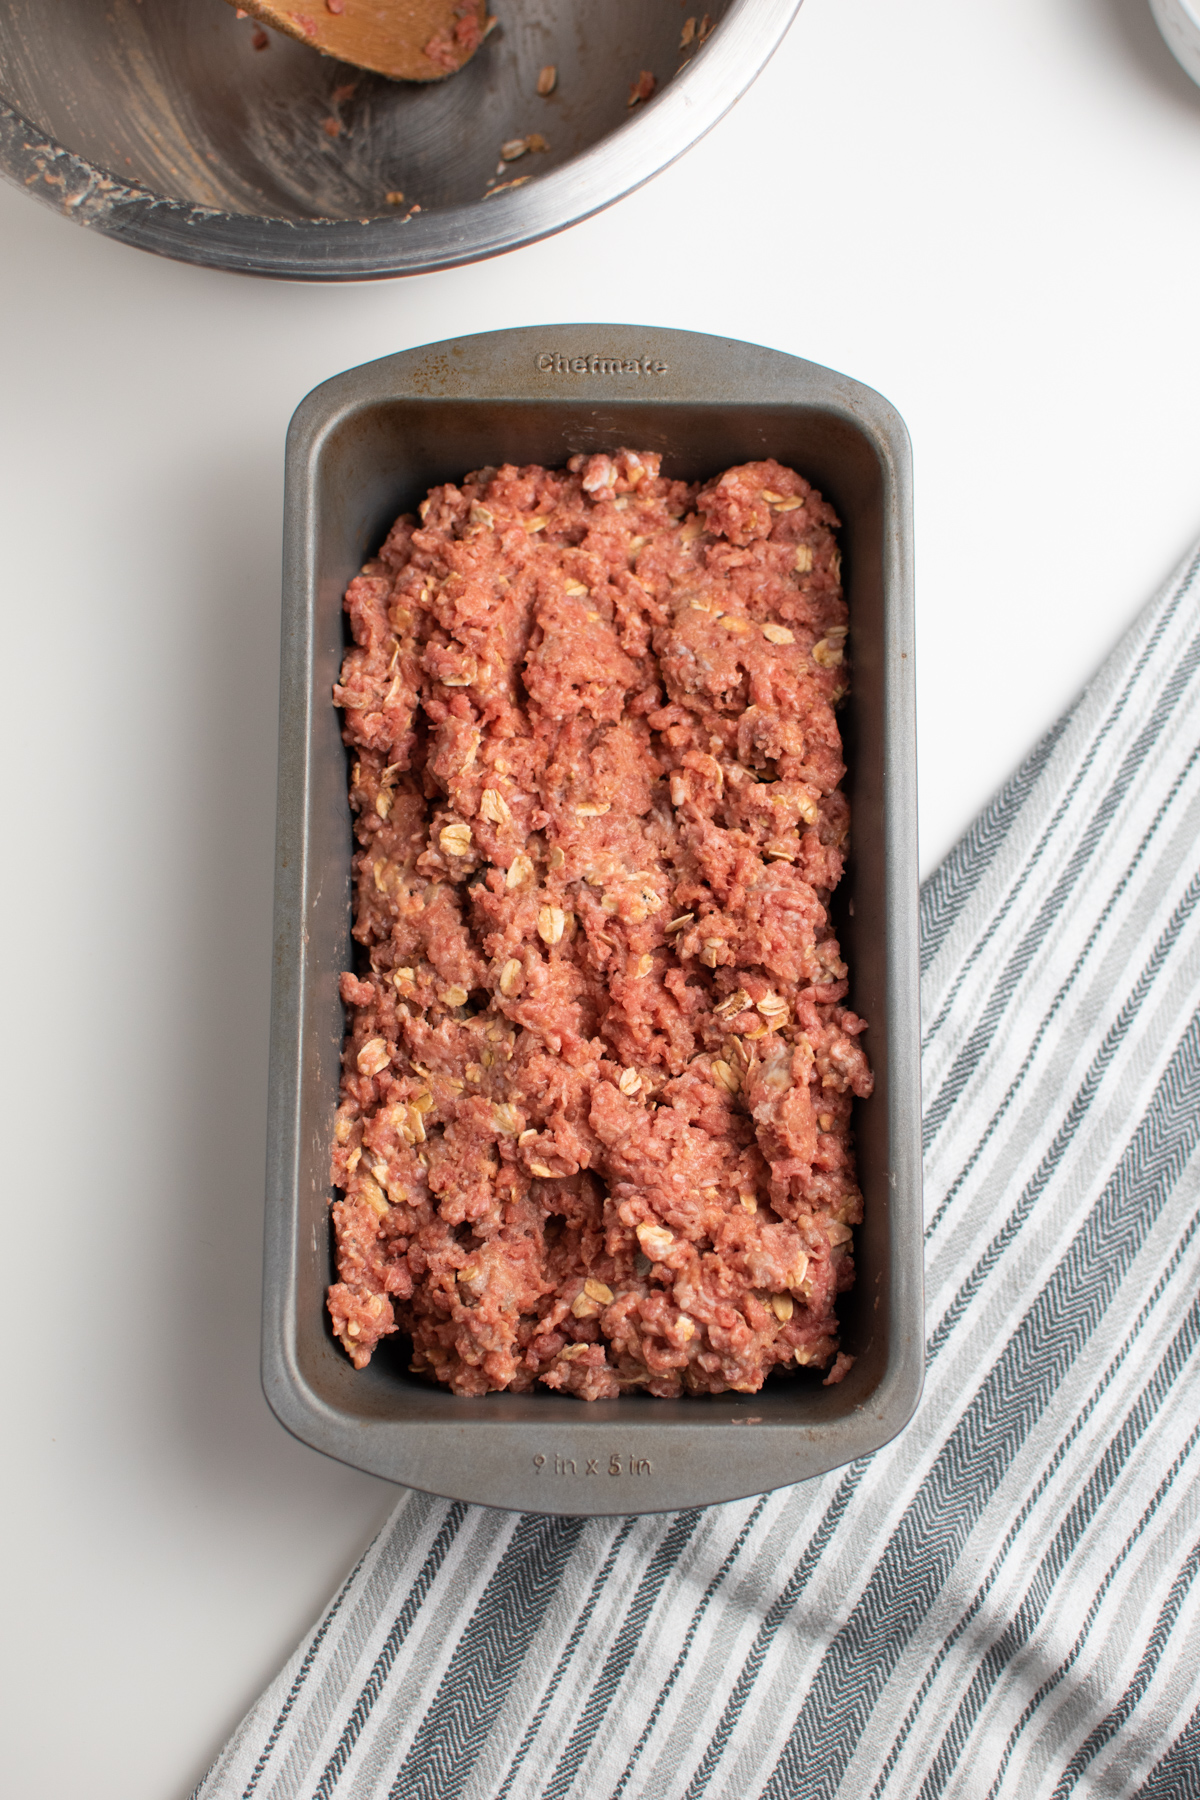 Uncooked ground beef meatloaf mixture in loaf baking pan with kitchen towel.